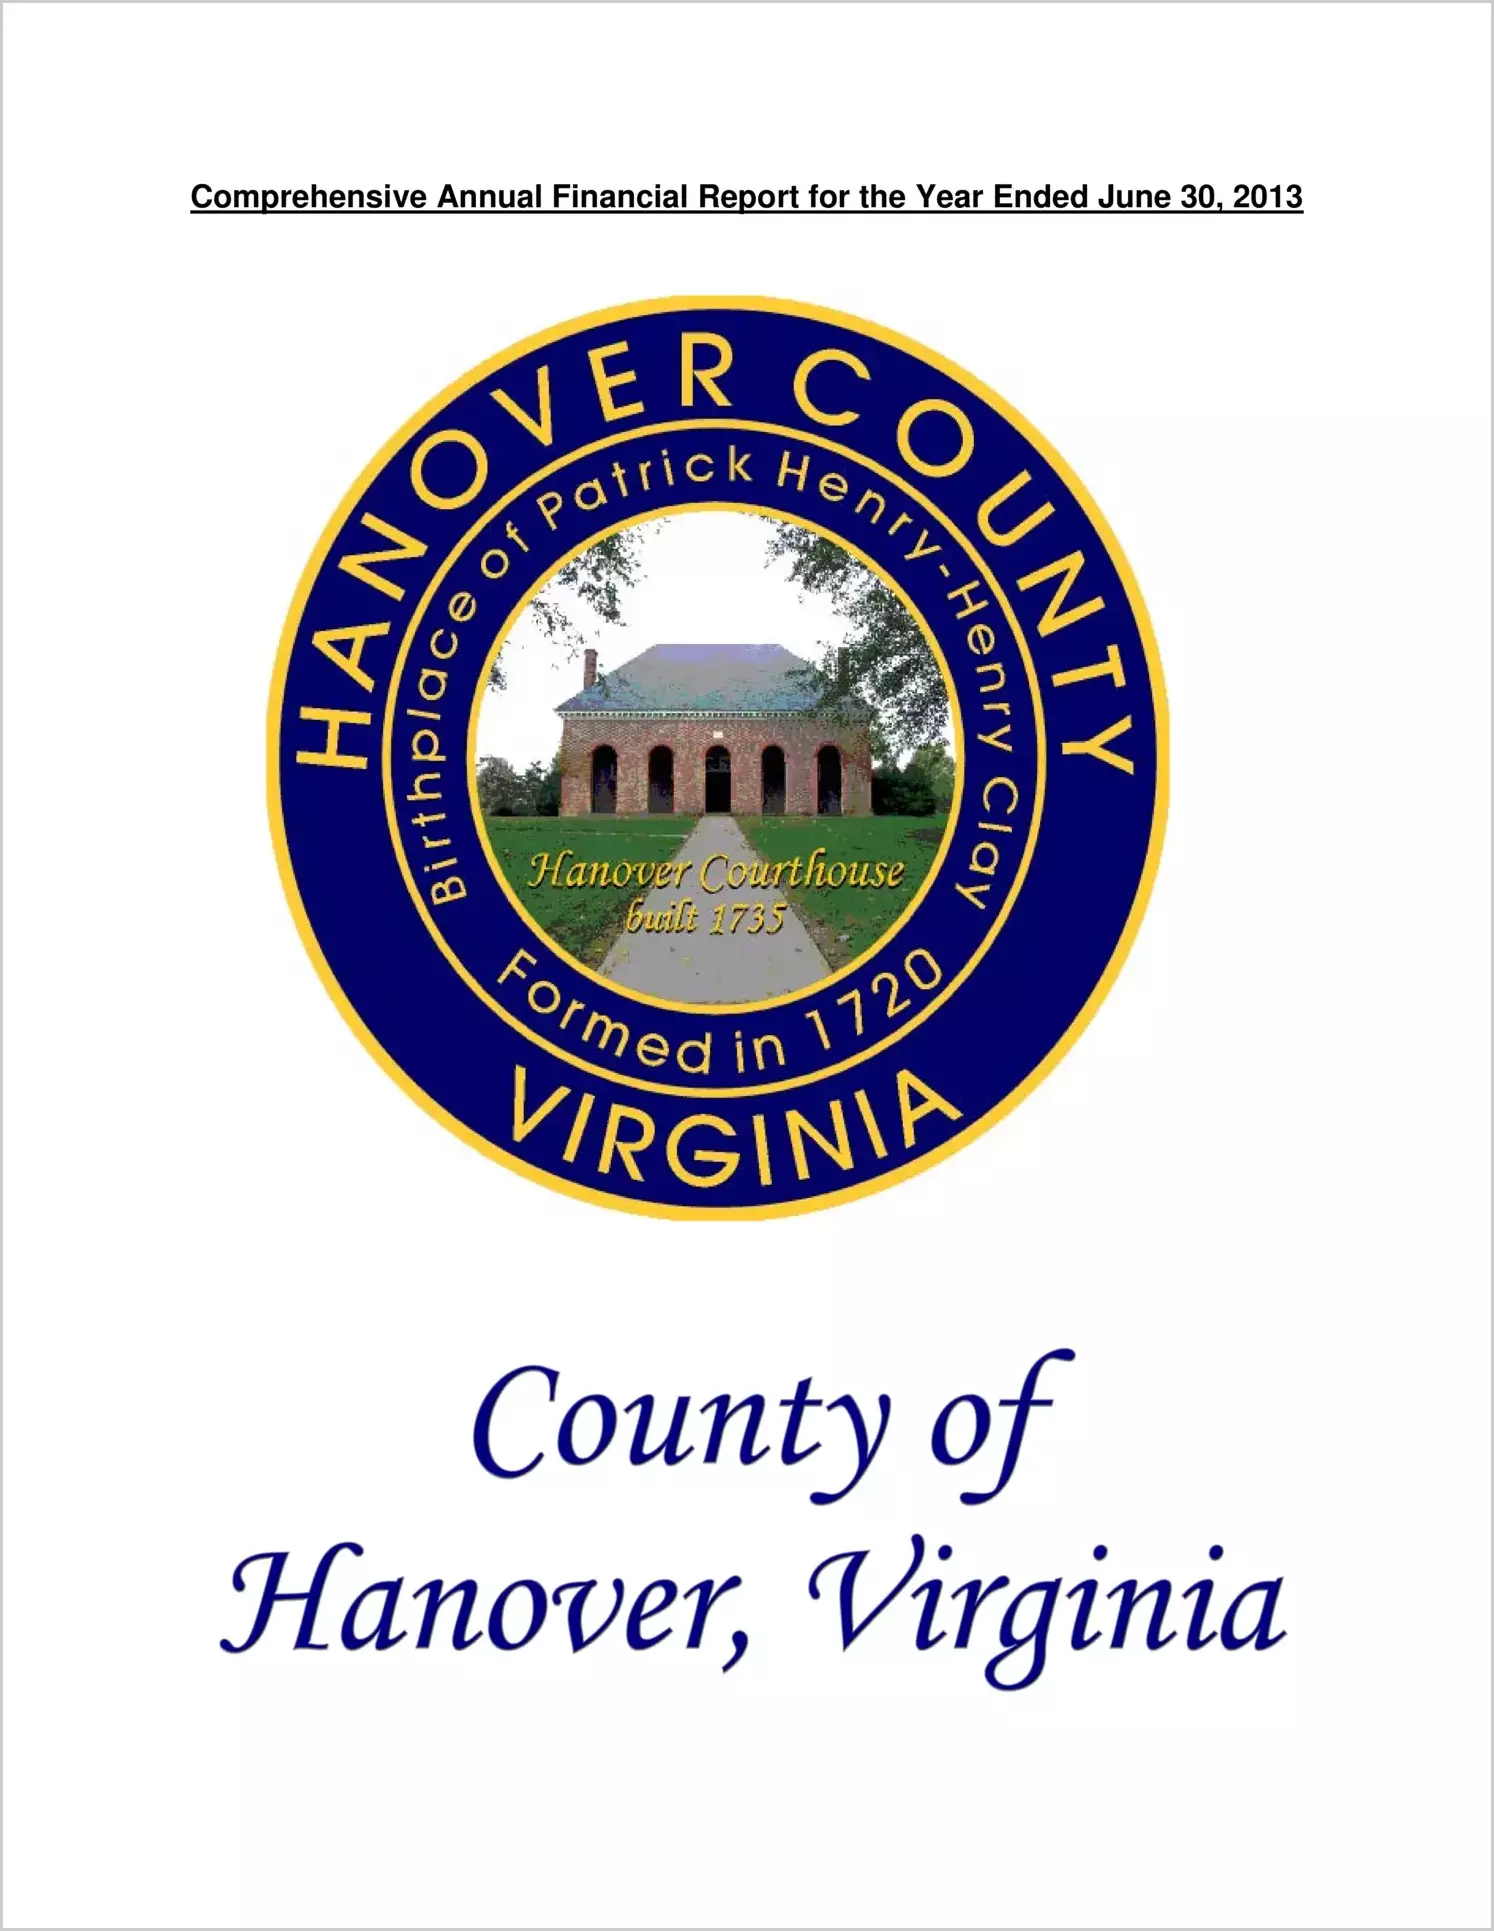 2013 Annual Financial Report for County of Hanover